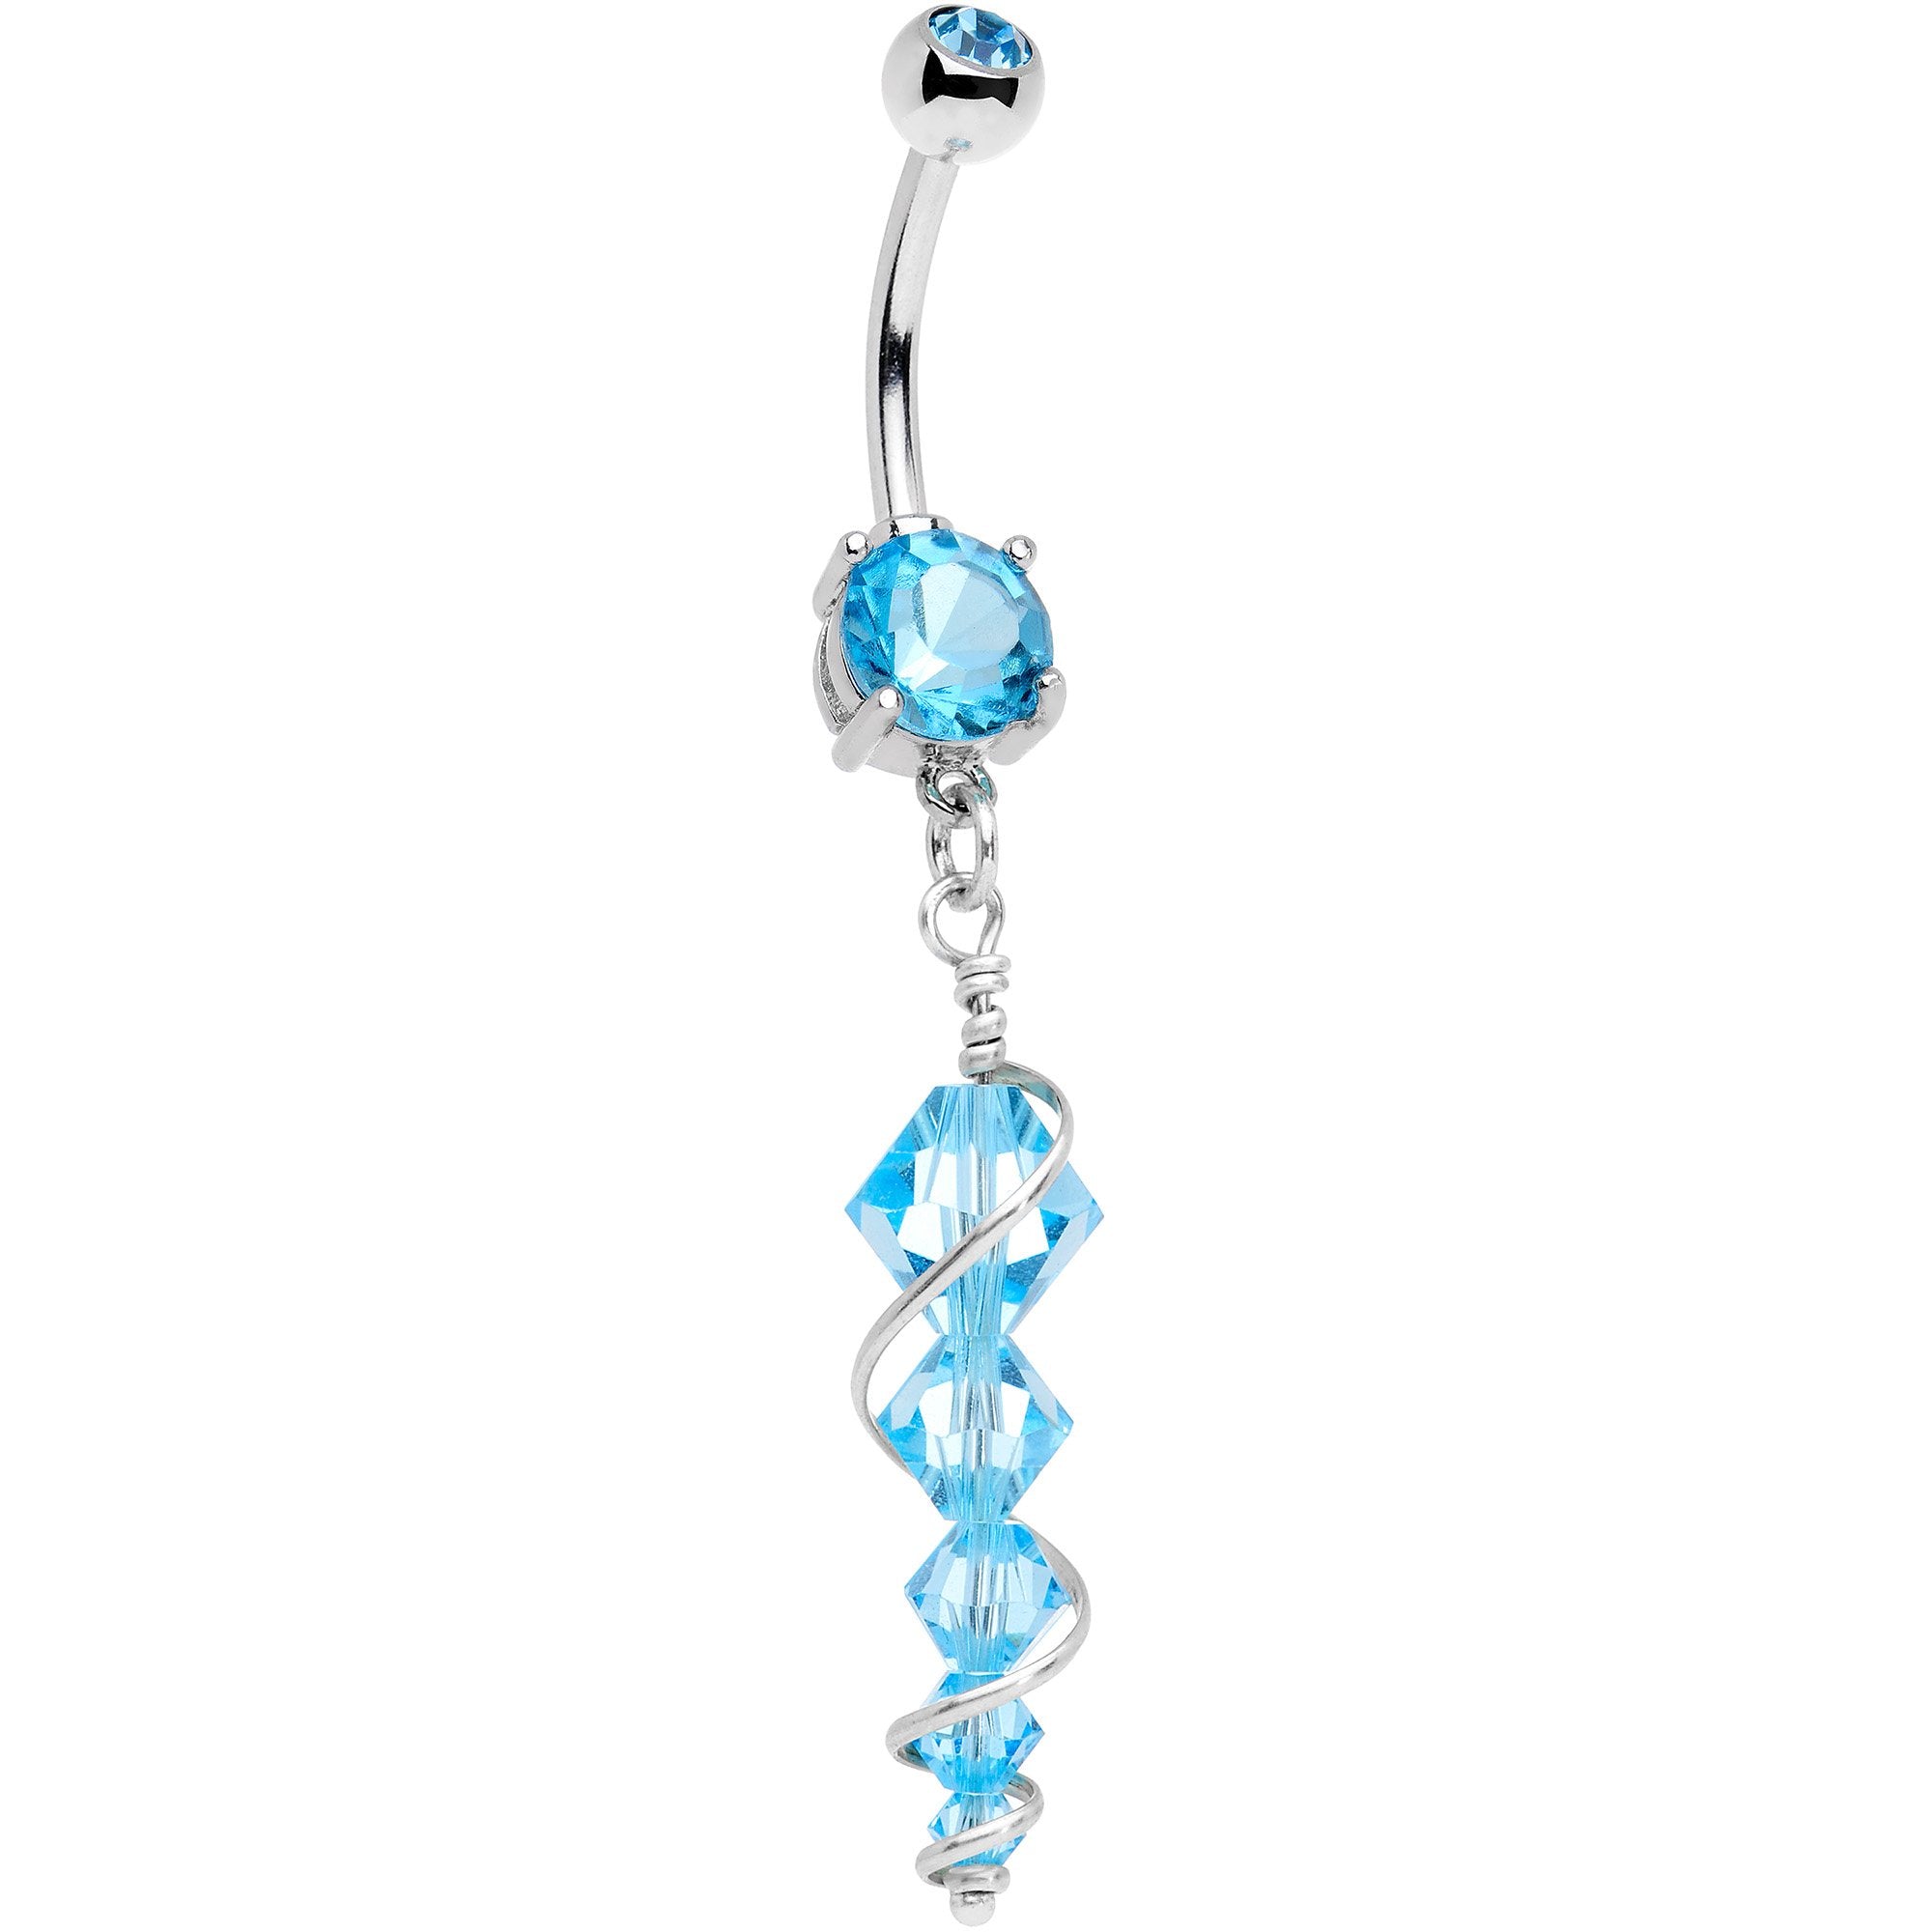 Handmade Blue Icicle Dangle Belly Ring Created with Crystals